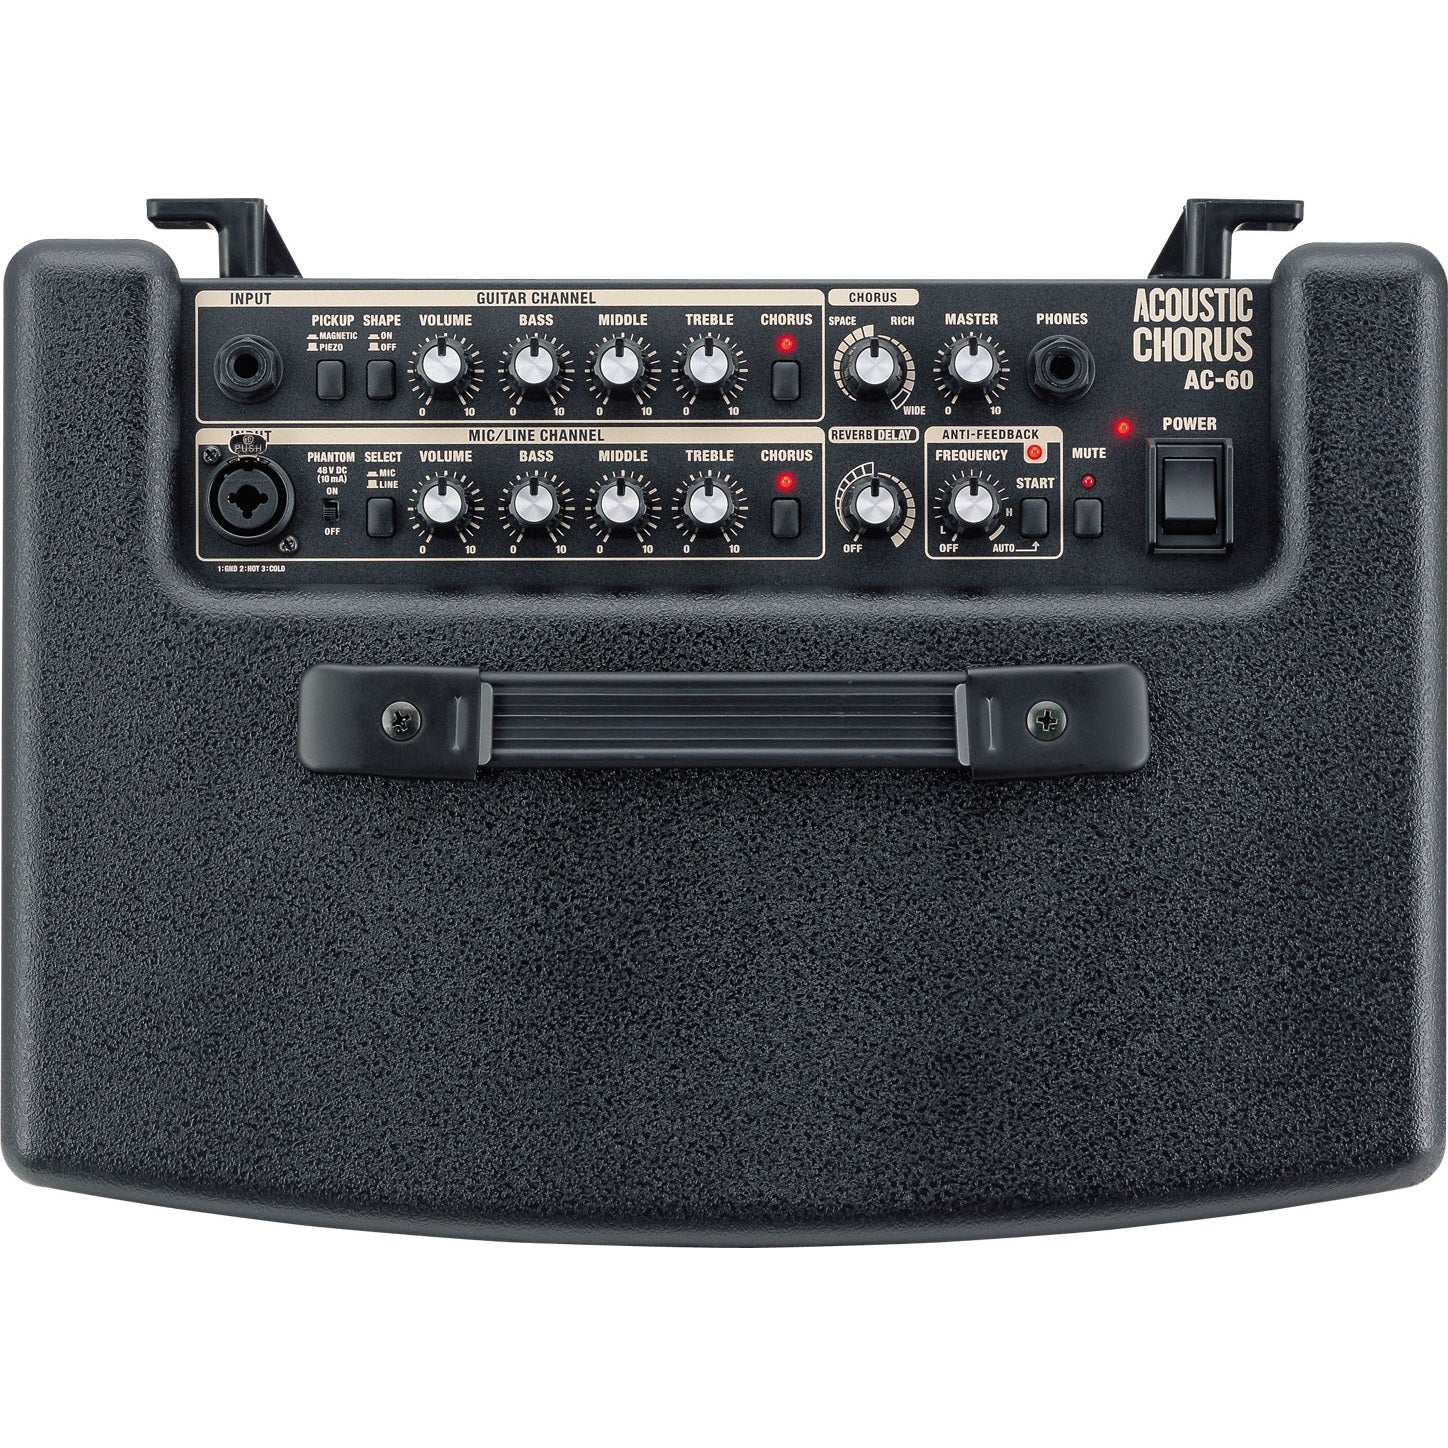 Image 4 of Roland AC-60 Acoustic Chorus Guitar Amplifier - SKU# AC60 : Product Type Amps & Amp Accessories : Elderly Instruments